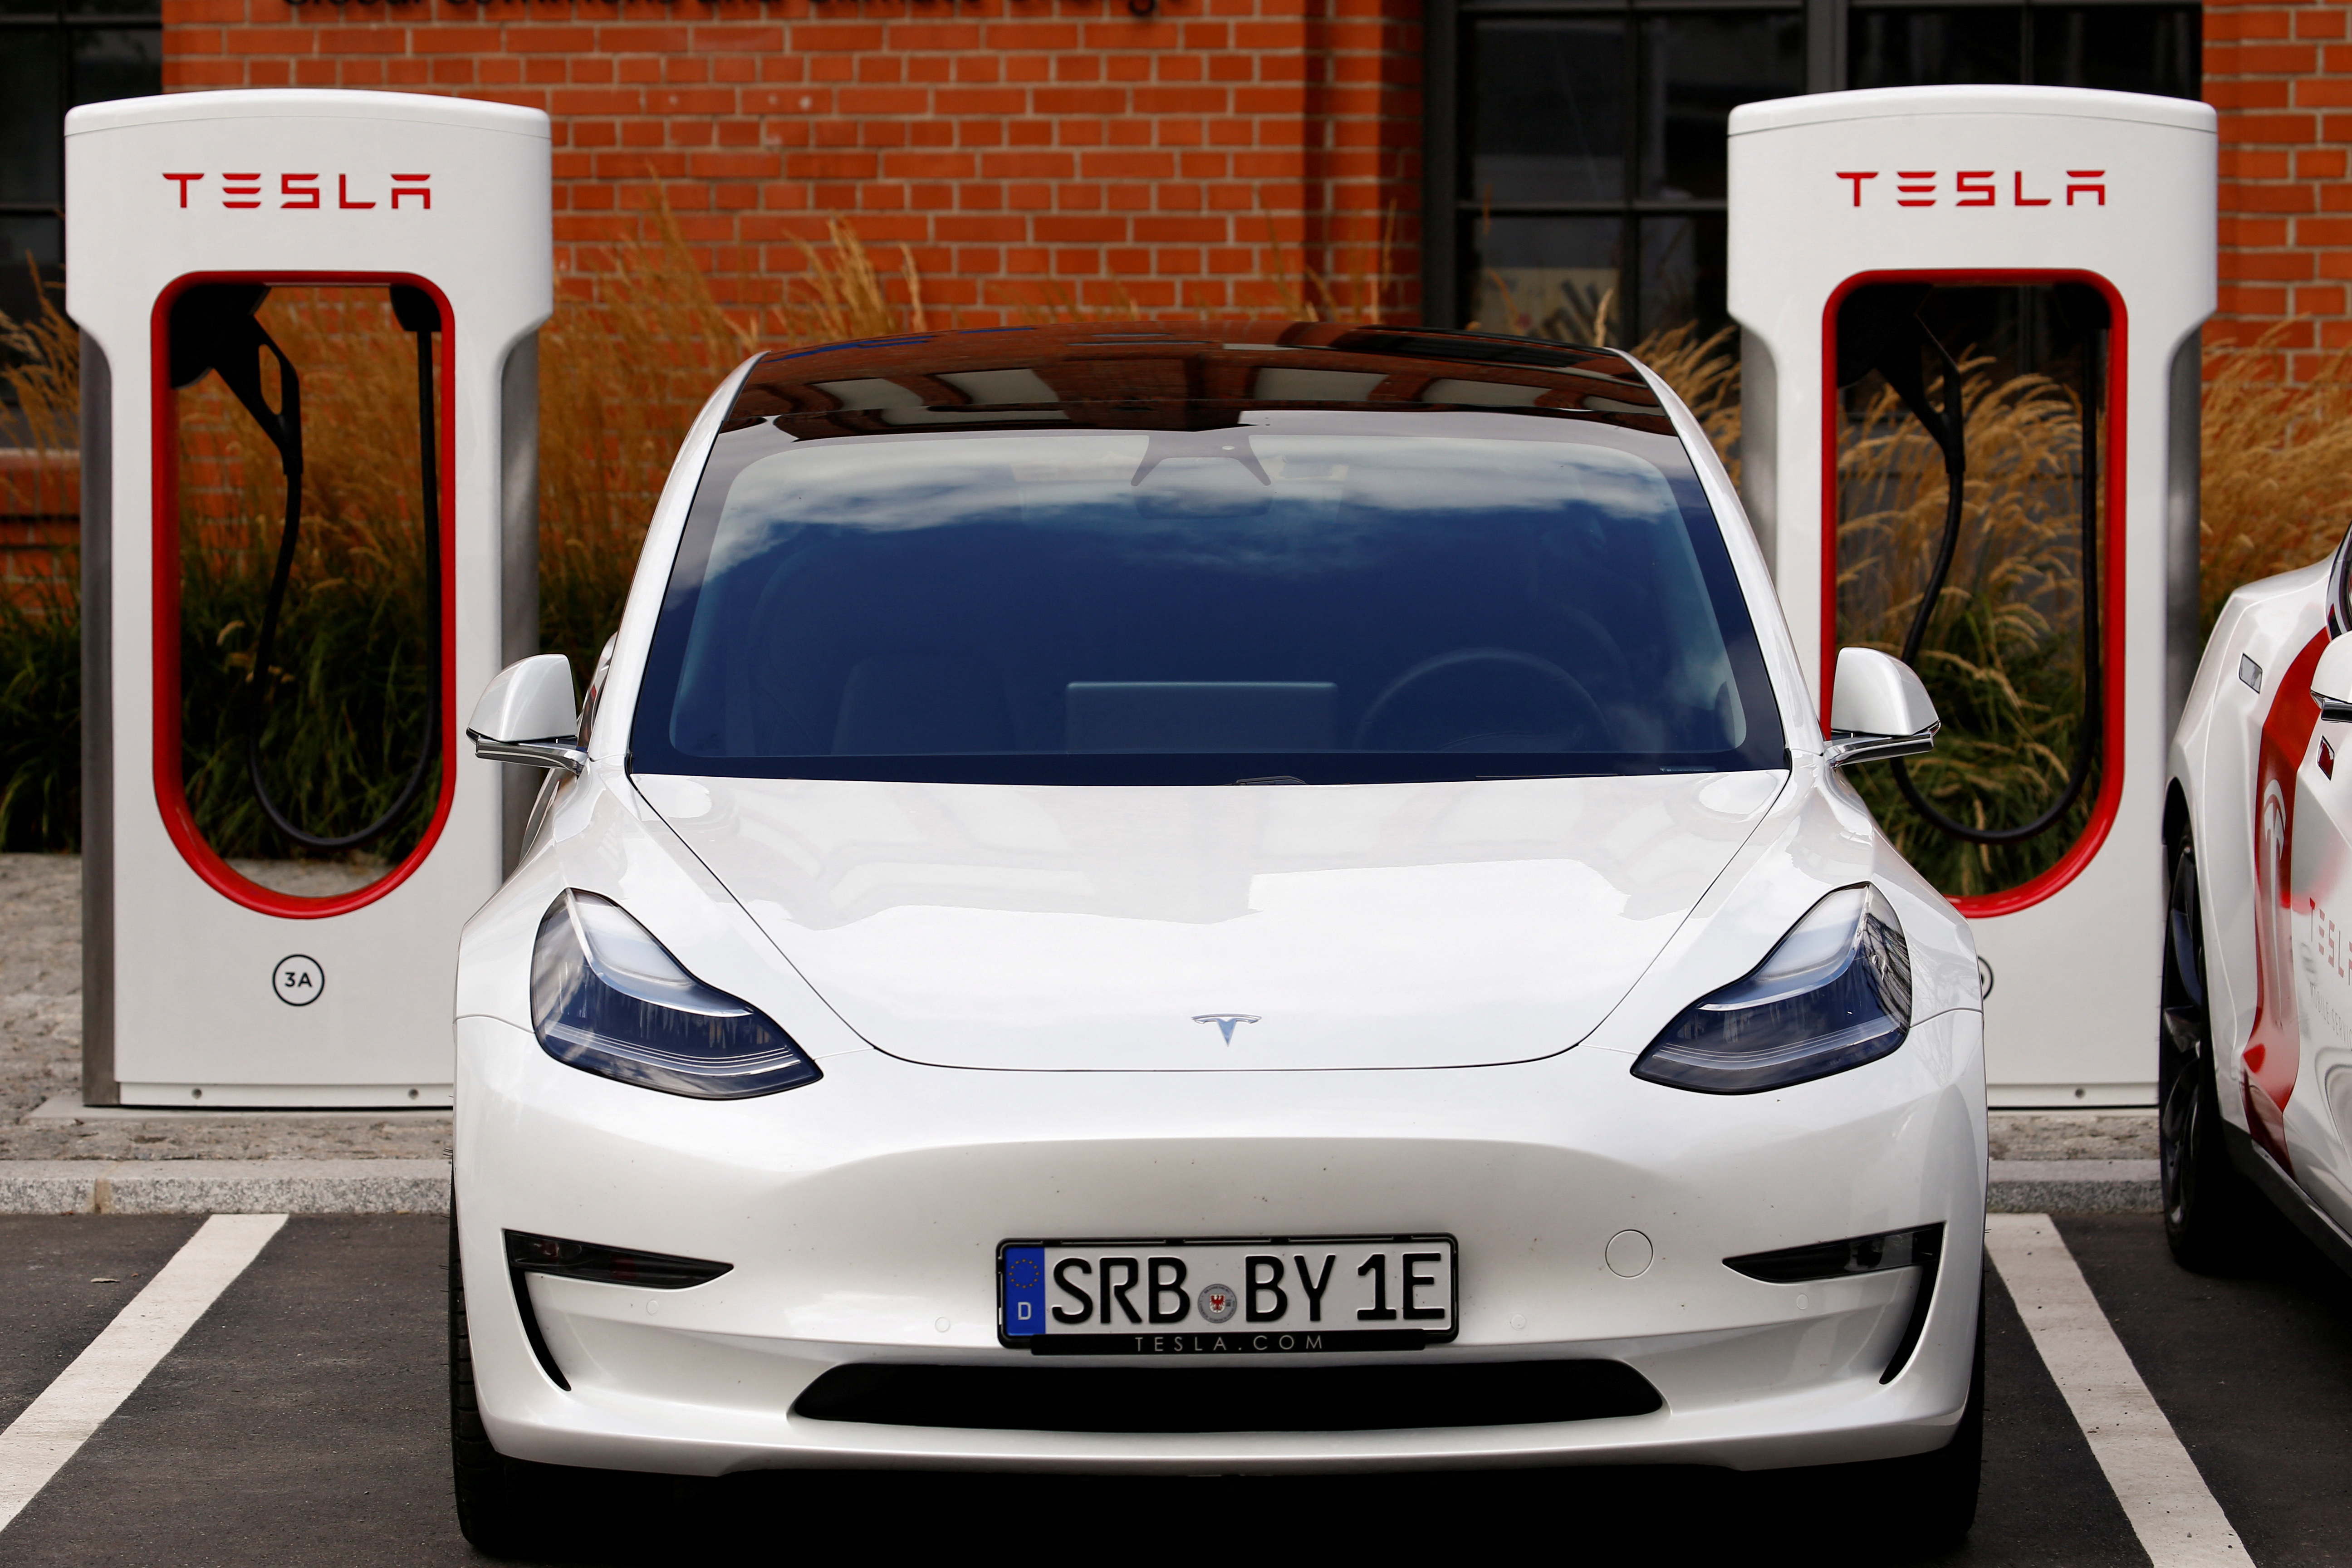 Tesla managers demonstrate V3 superchargers on German research campus in Berlin